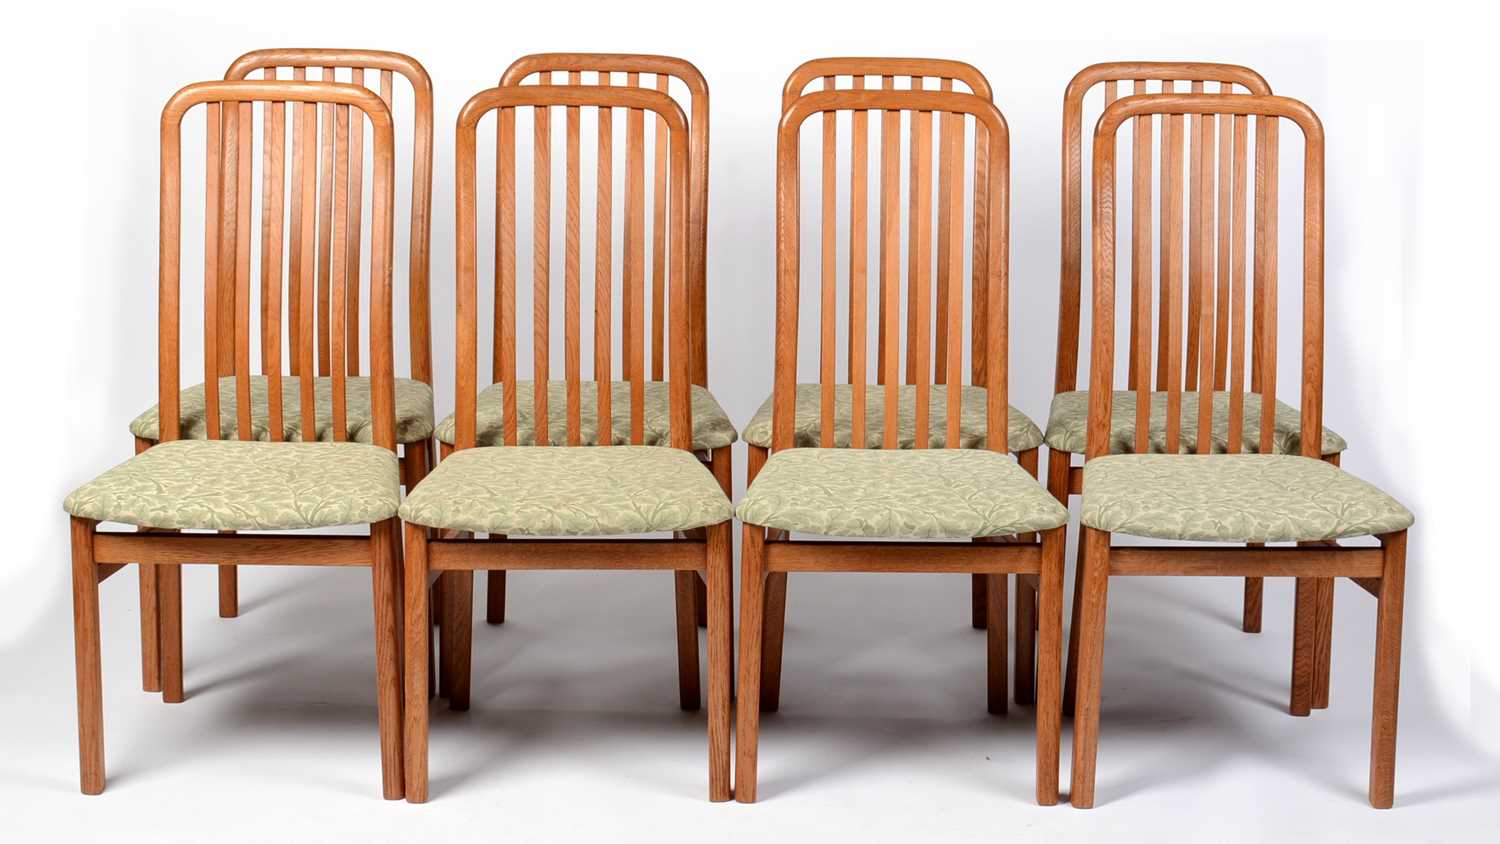 Lot 17 - A set of eight retro vintage mid 20th century dining chairs by Preben Schou of Denmark